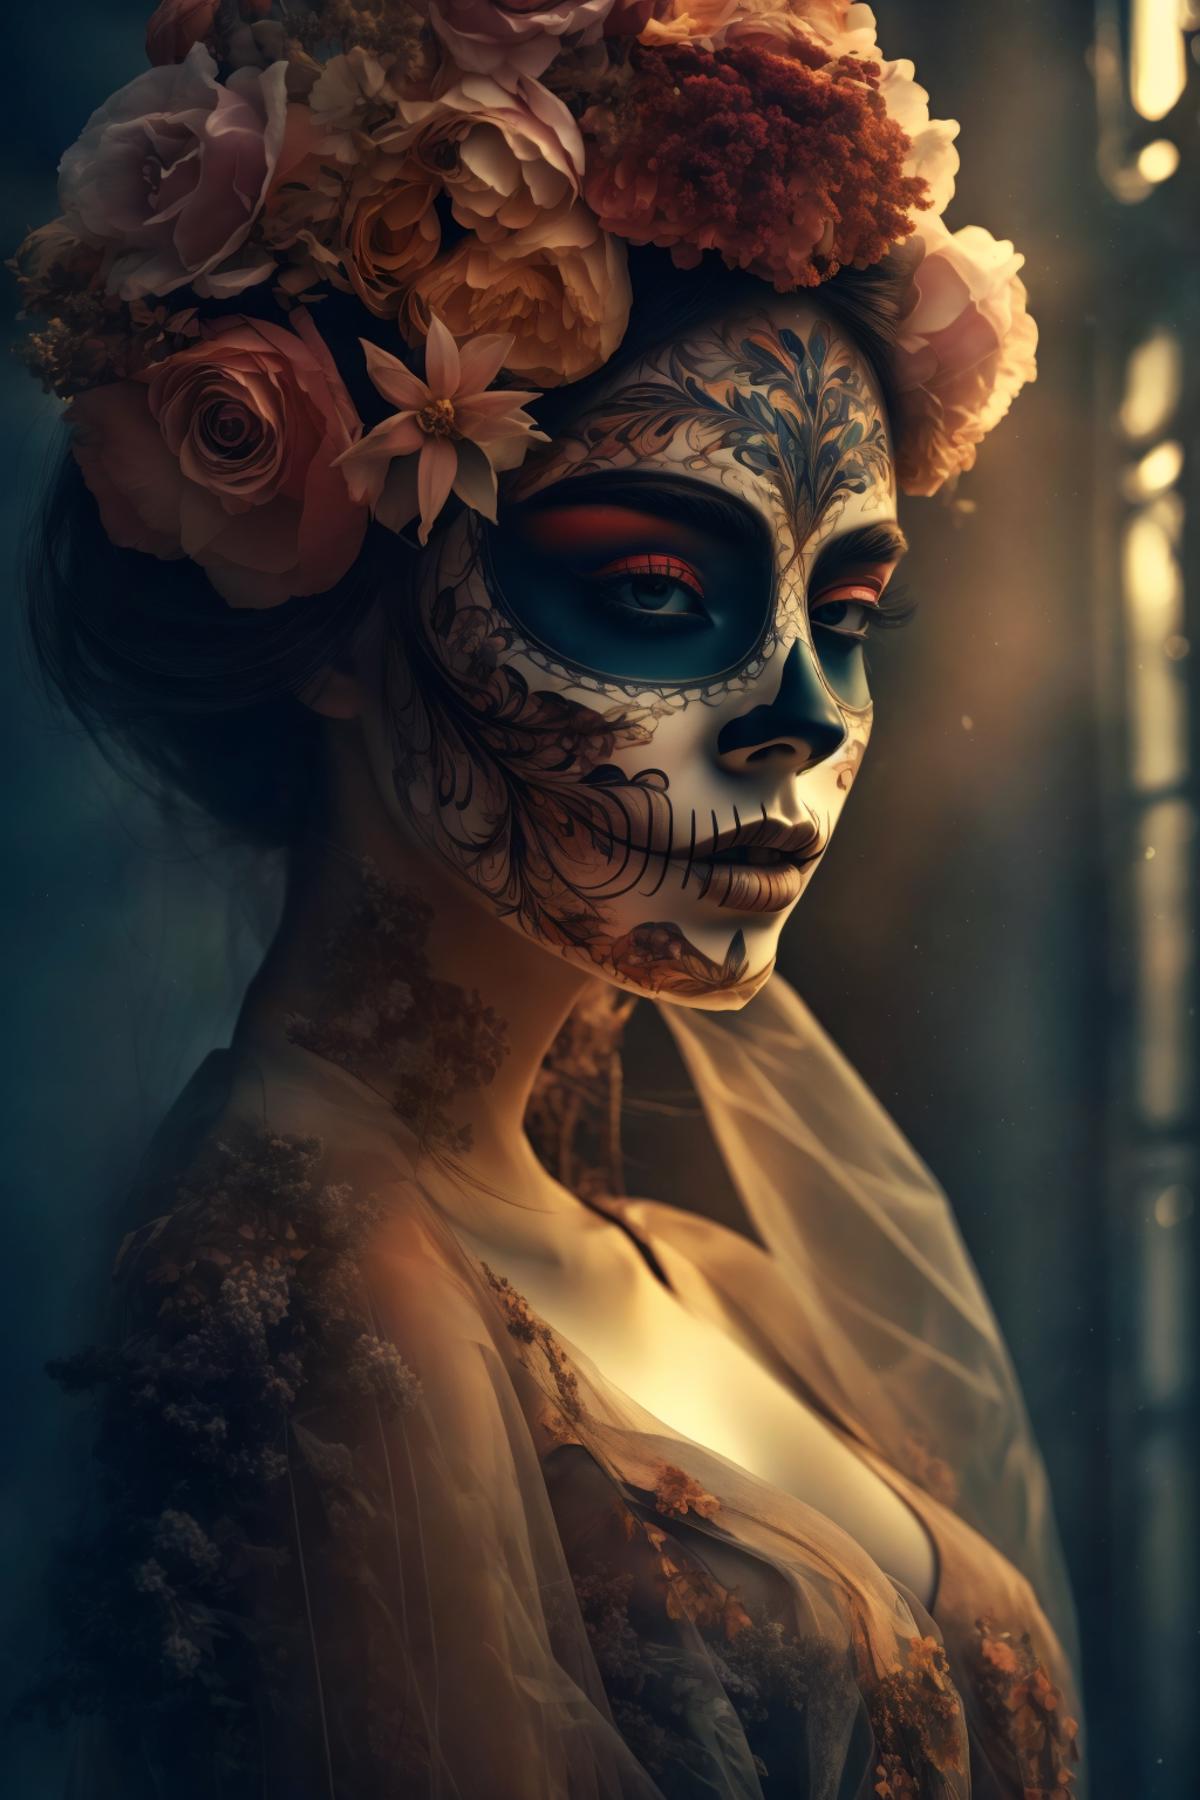 A woman with a sugar skull face tattoo wearing a white veil.